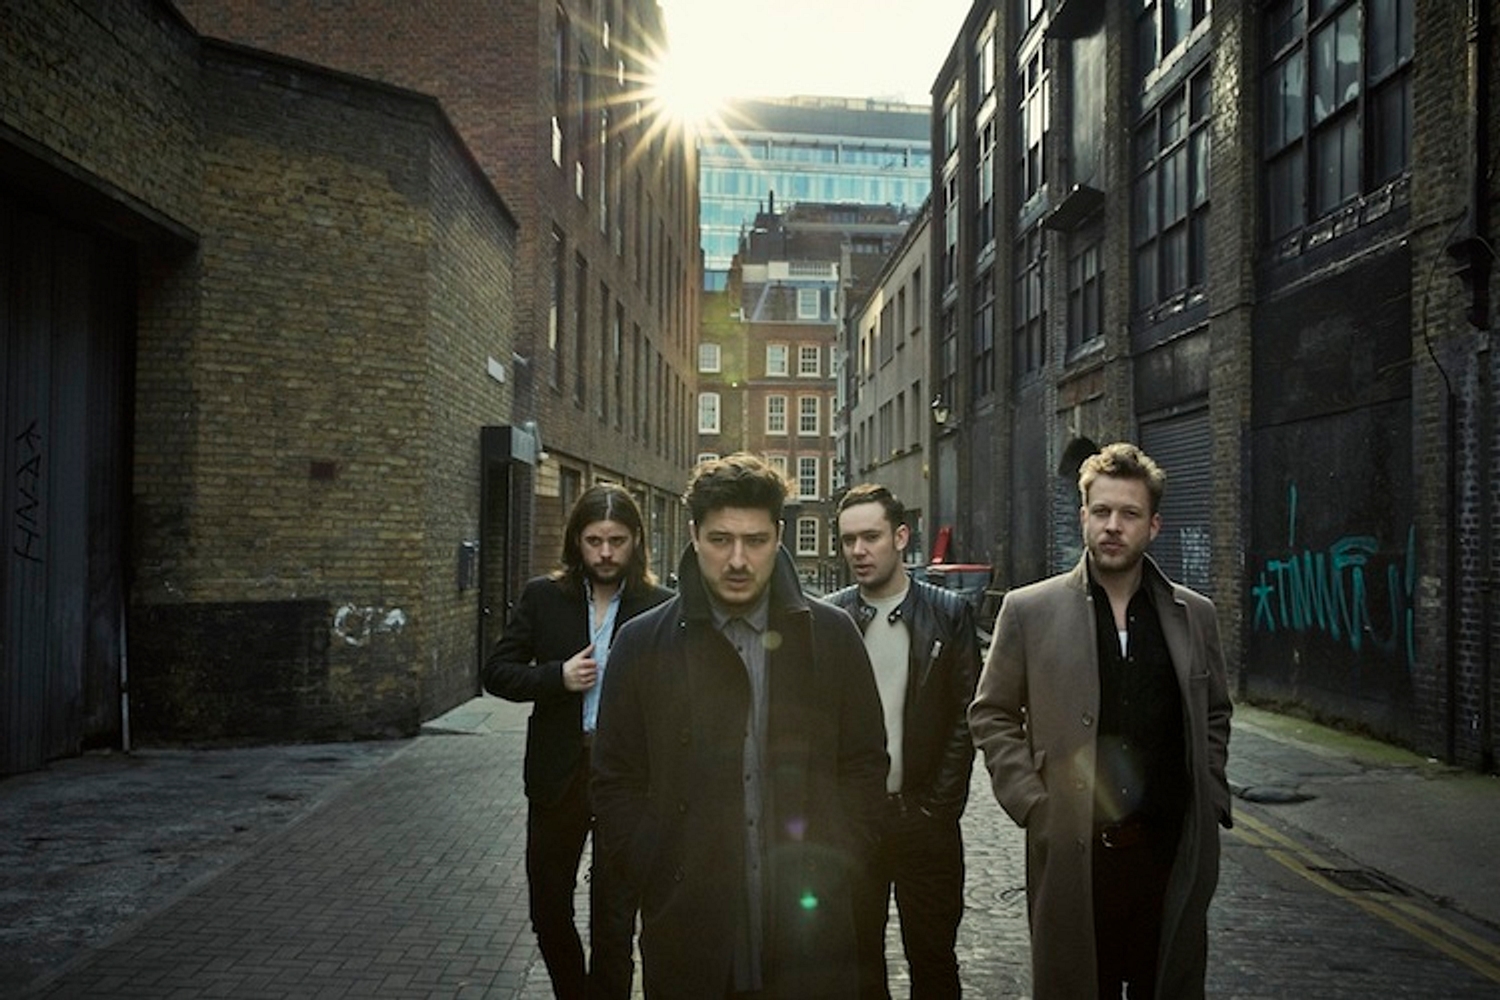 The Maccabees, Foo Fighters, The Flaming Lips to support Mumford & Sons on ‘Gentlemen of the Road’ shows